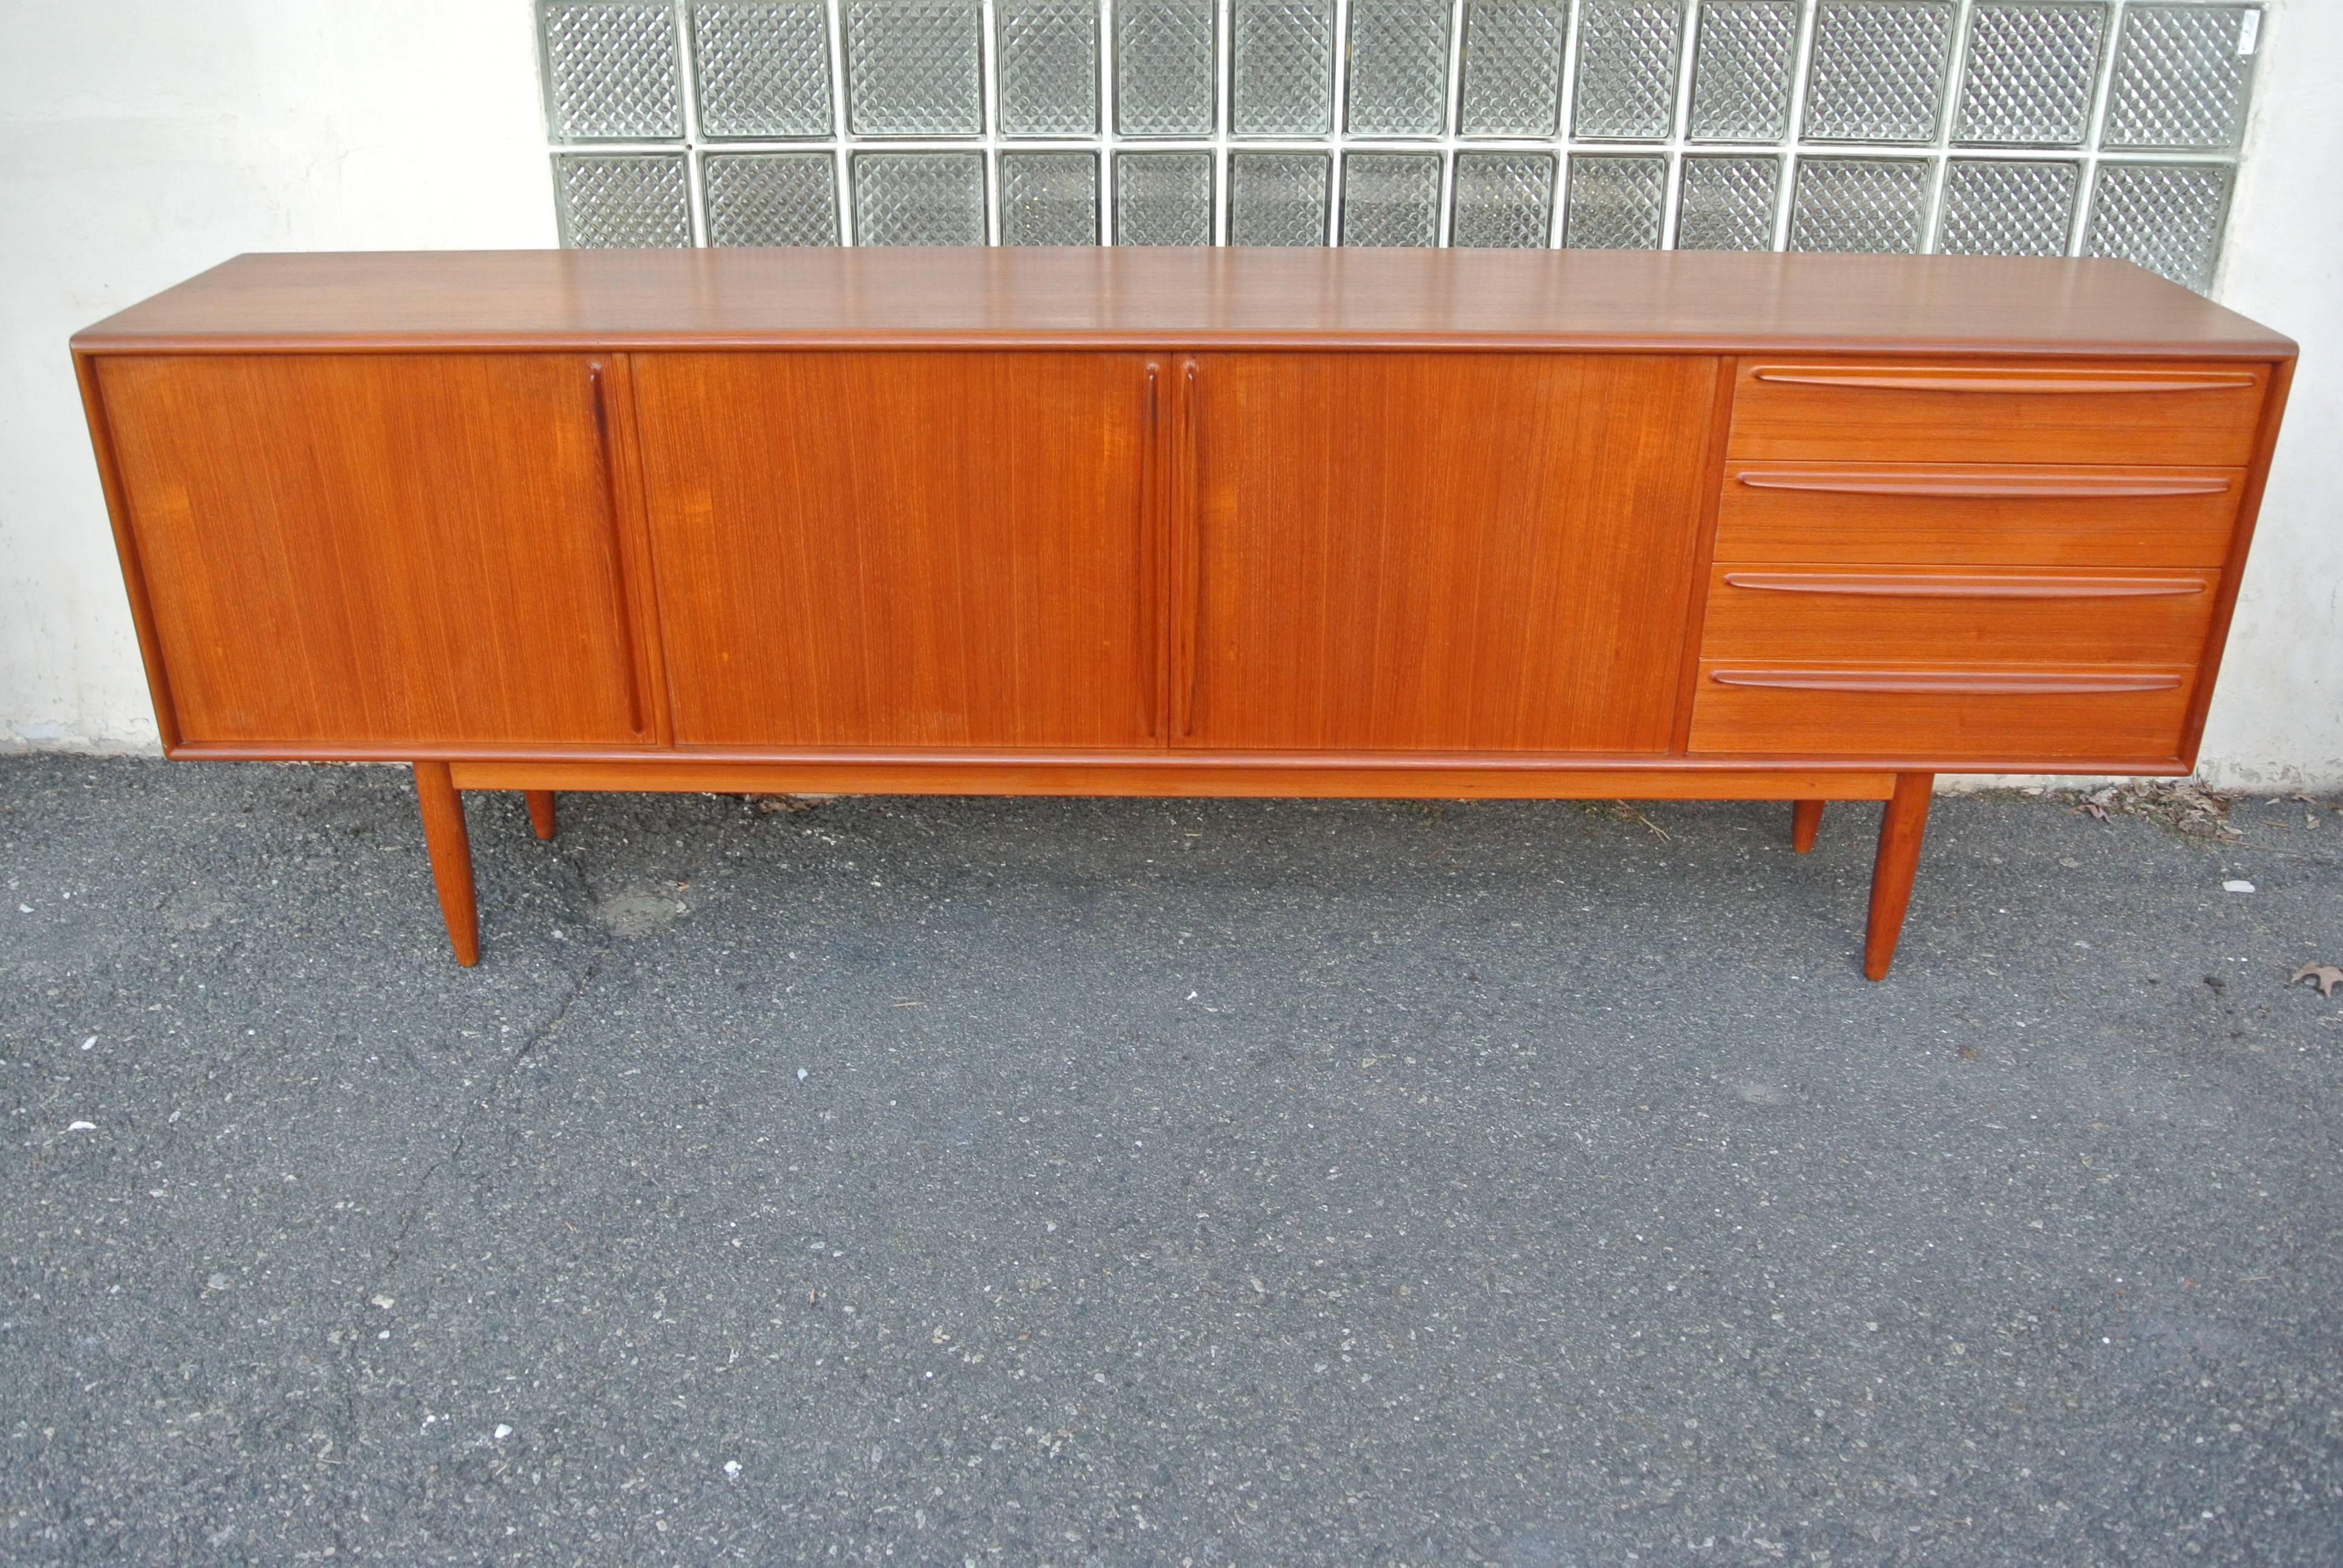 Beautiful 8' teak sideboard by Bernhard Pedersen & Son. 
The left compartment is designed to house a wet bar. the middle two doors open and expose storage with two shelves on each side. And the right houses four individual drawers, with the top